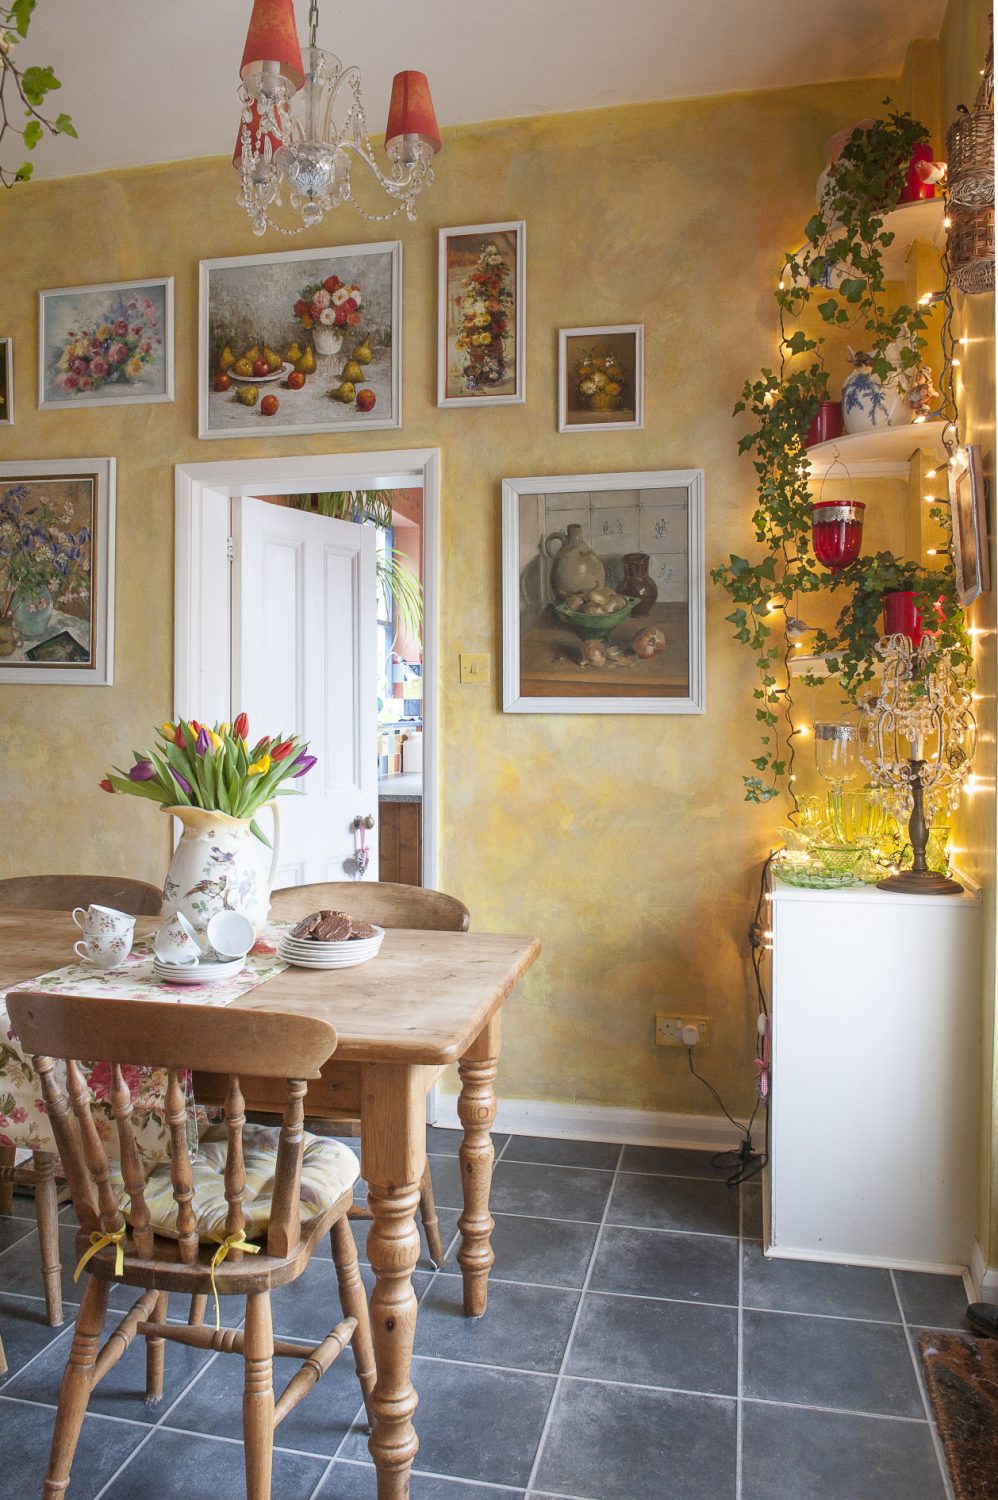 The yellow breakfast room is covered in still life pictures and cascades of ivy